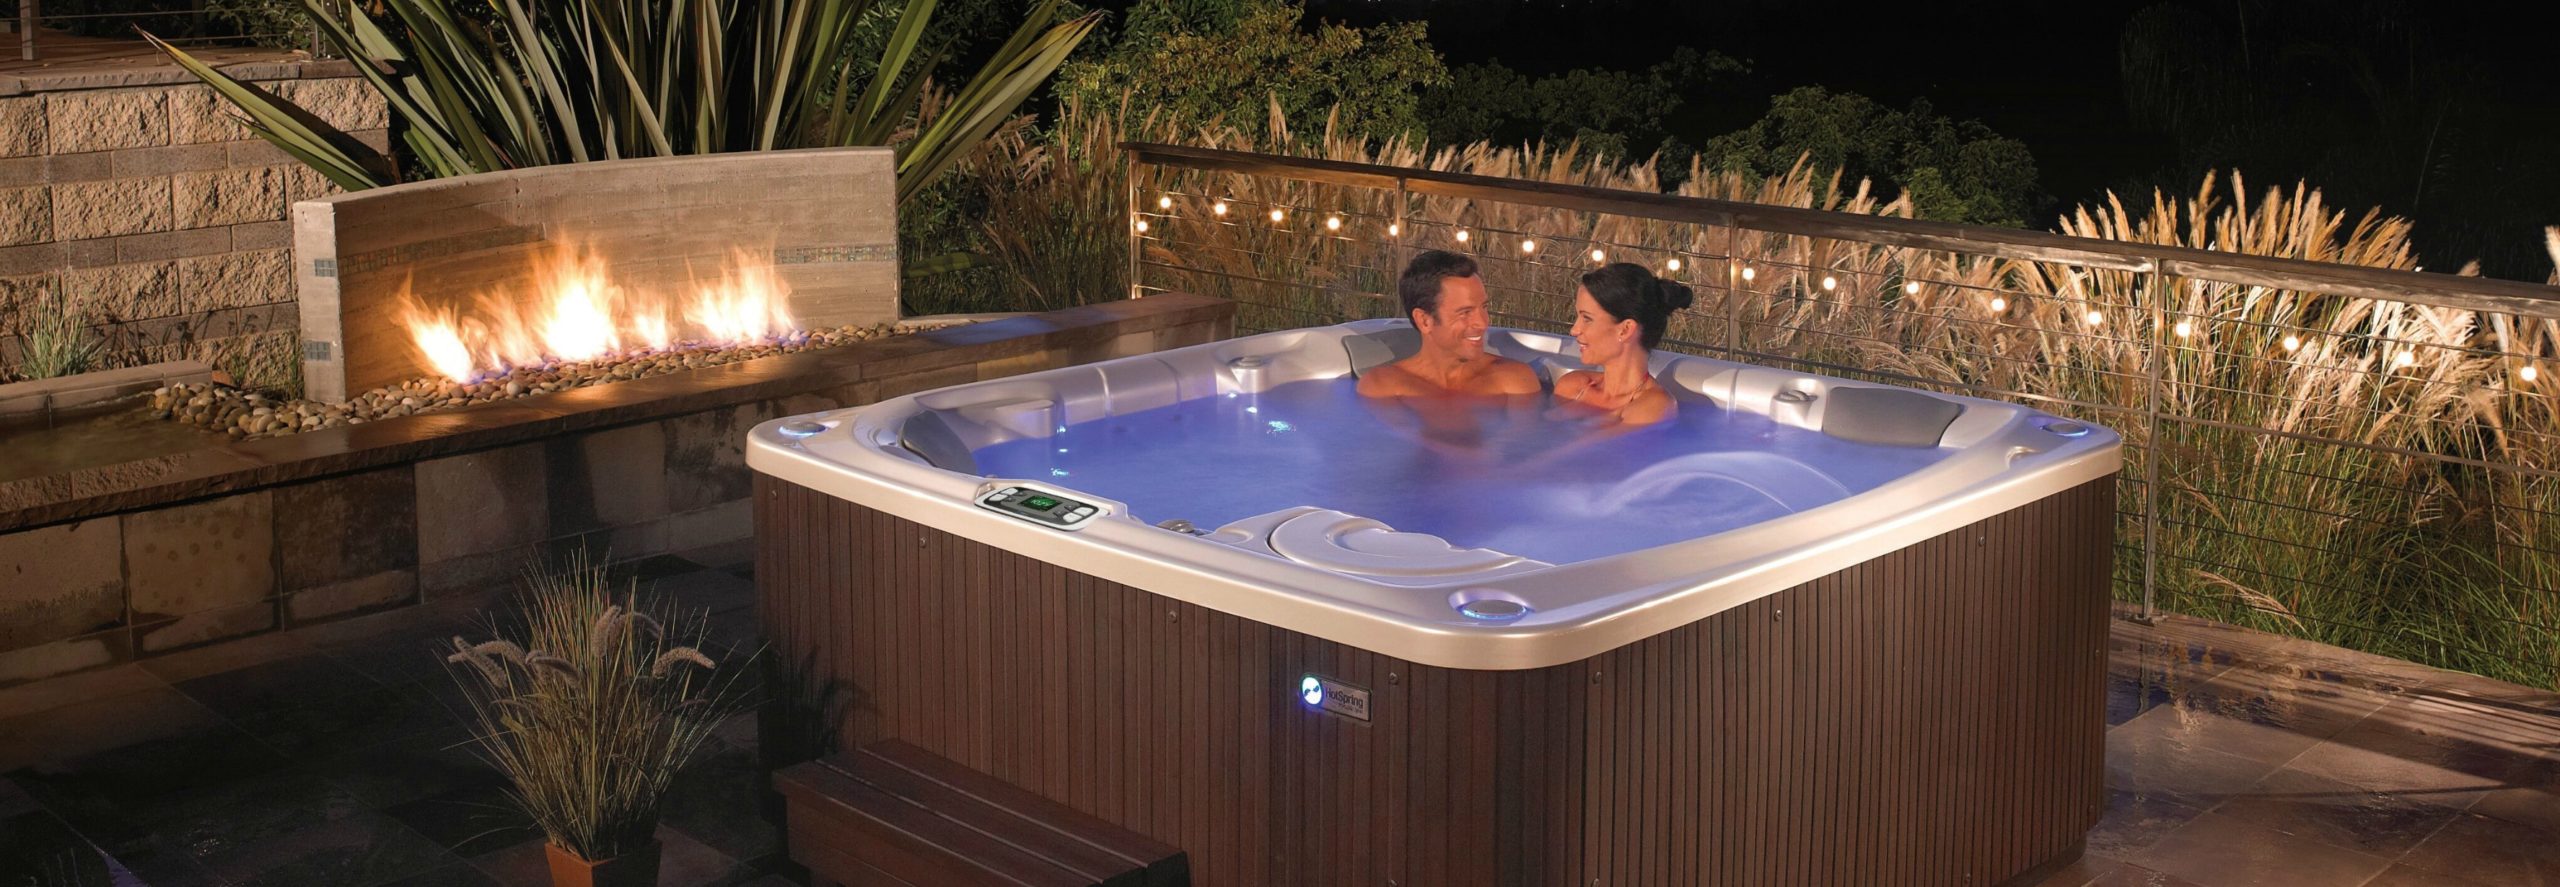 What is the difference between jetted tub and Jacuzzi?